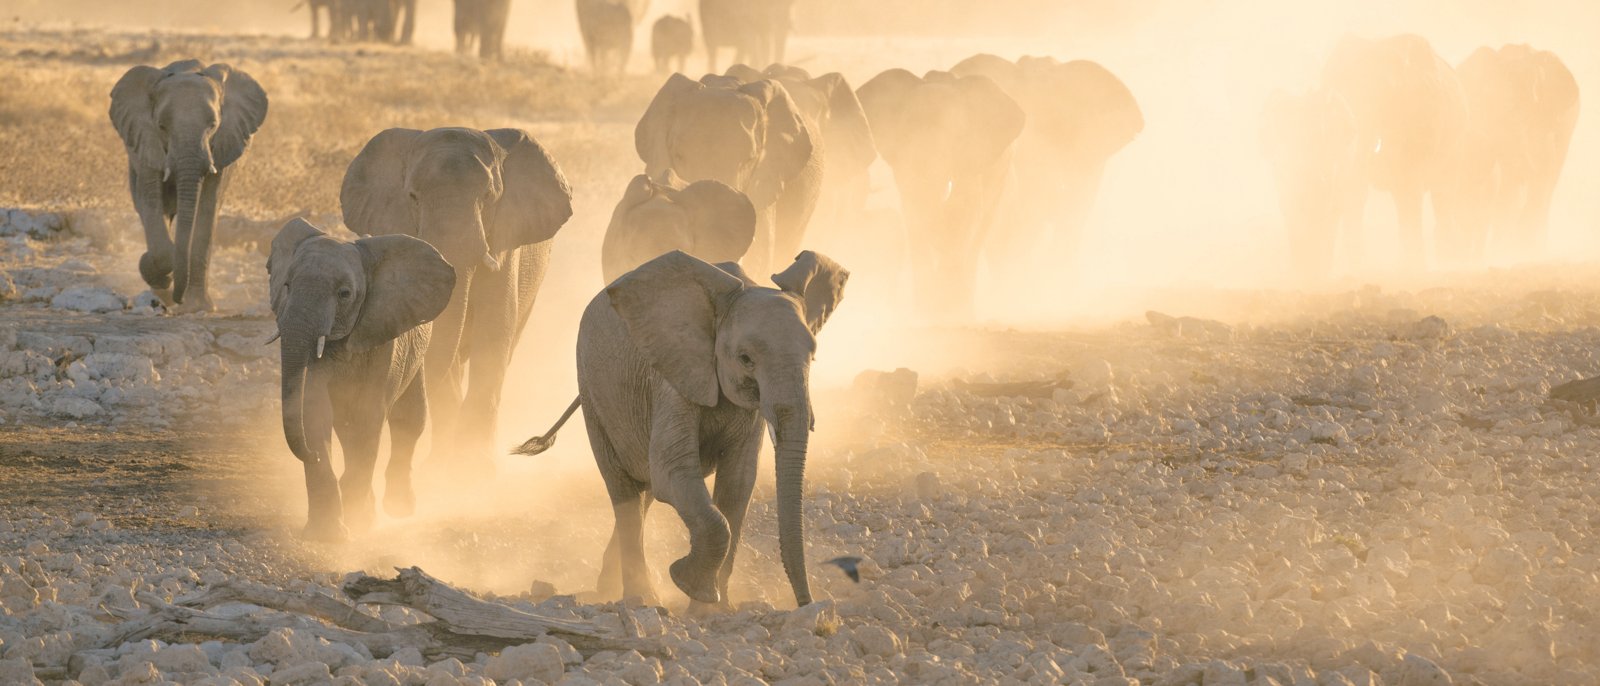 Elephants at Okaukuejo Water hole at sunset with yellow dust